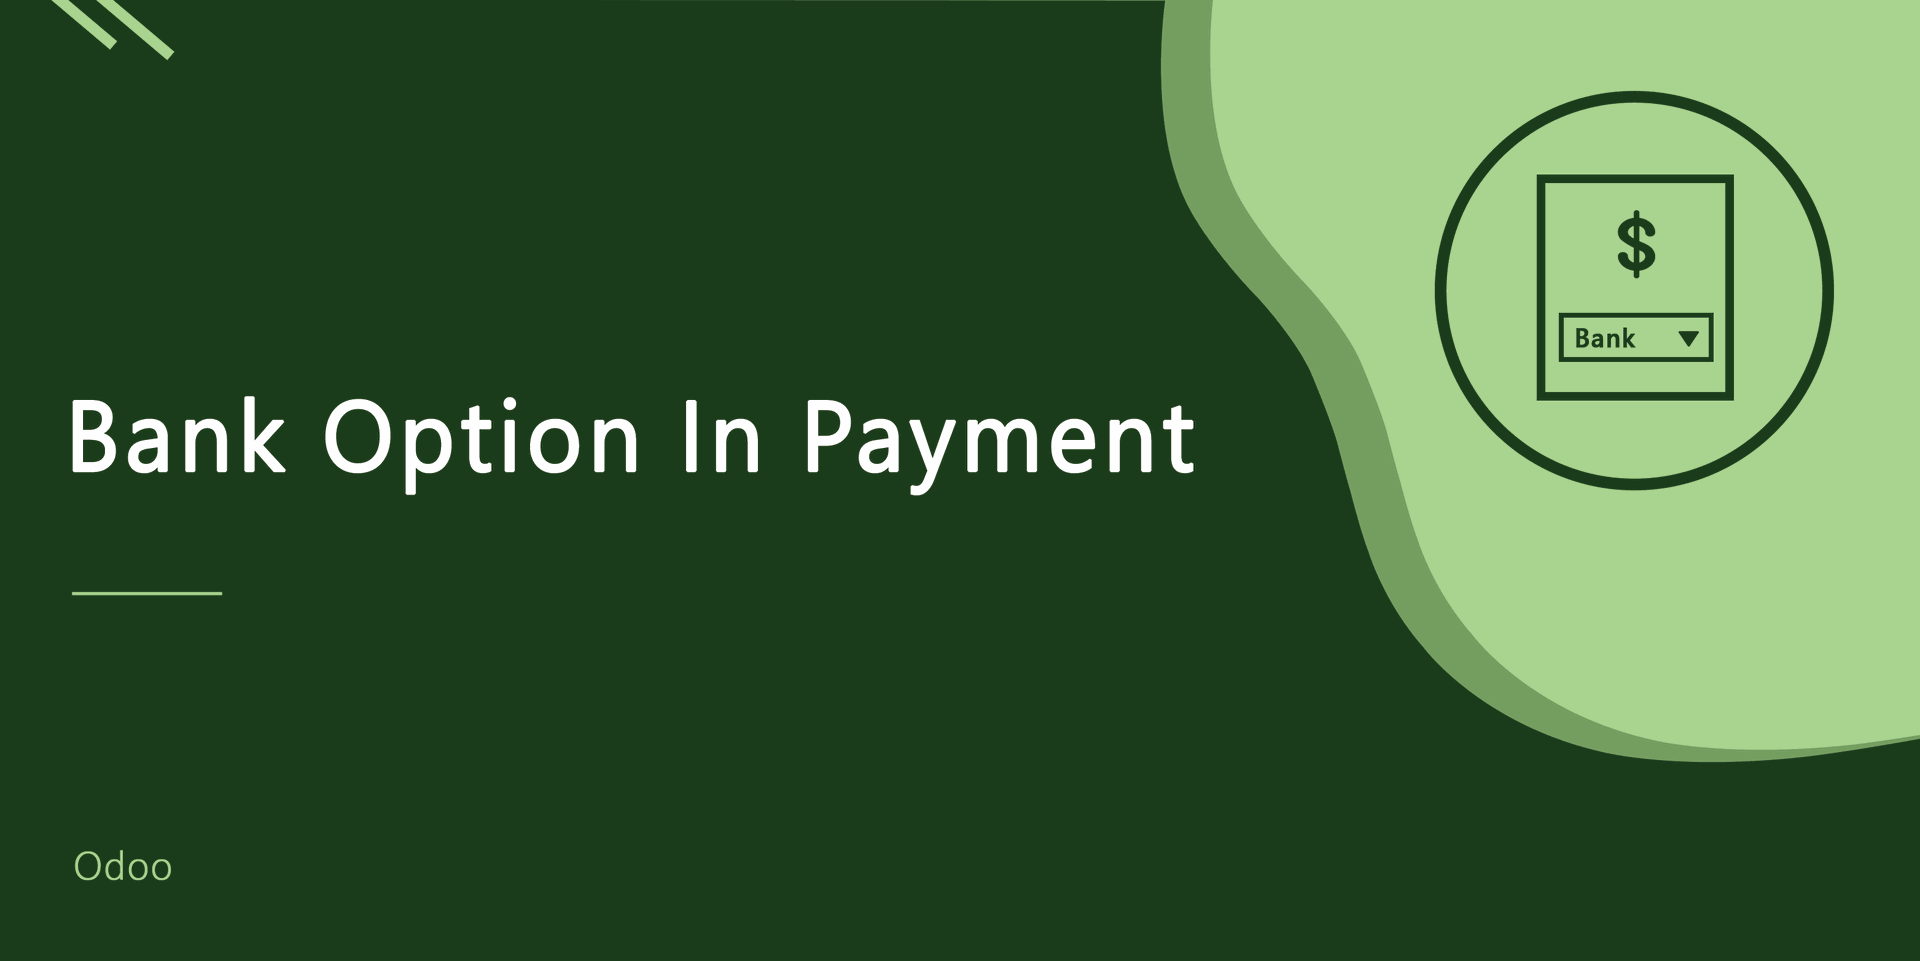 Bank Option In Payment